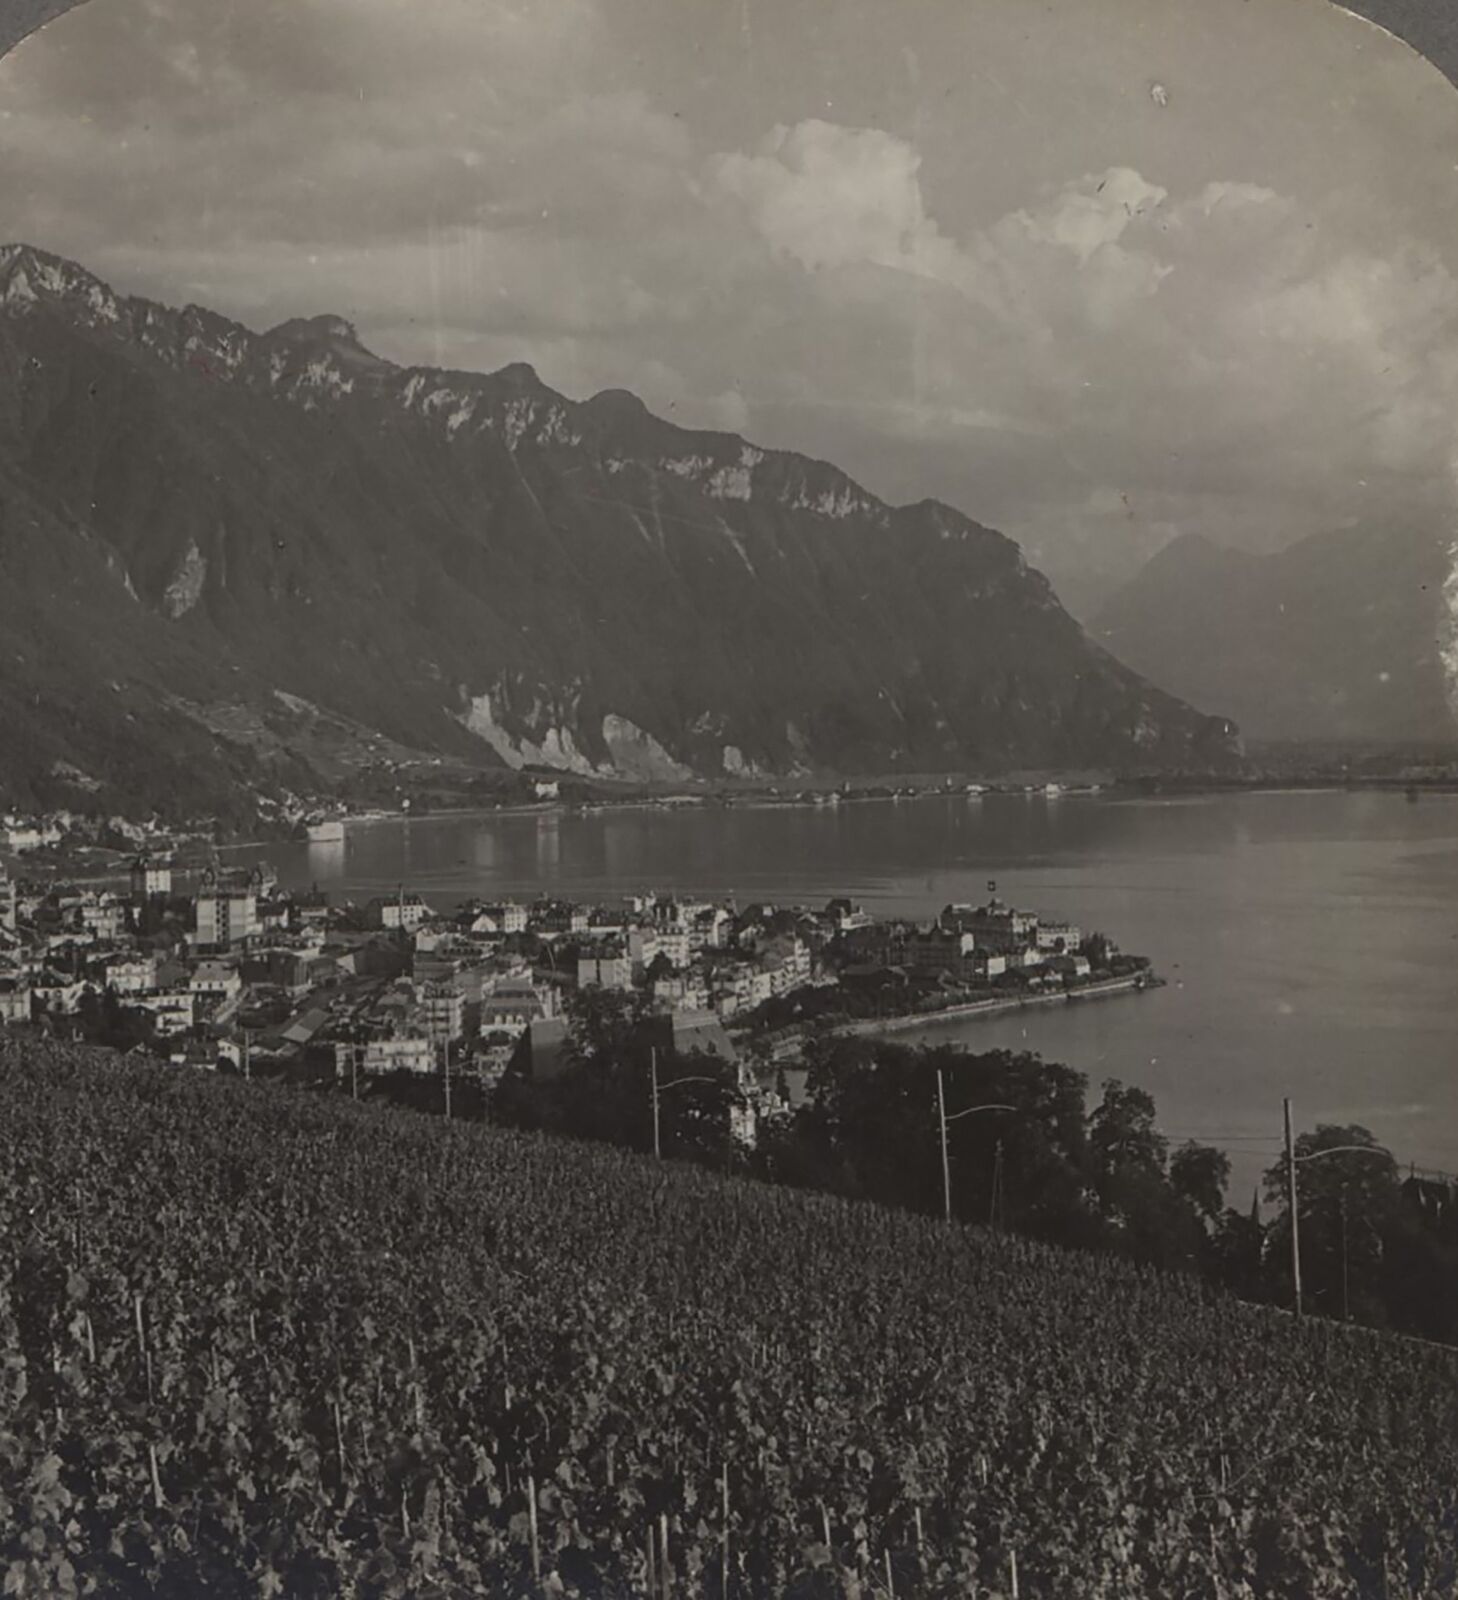 Montreux on lake Leman Switzerland Stereo Travel Stereoview 1908